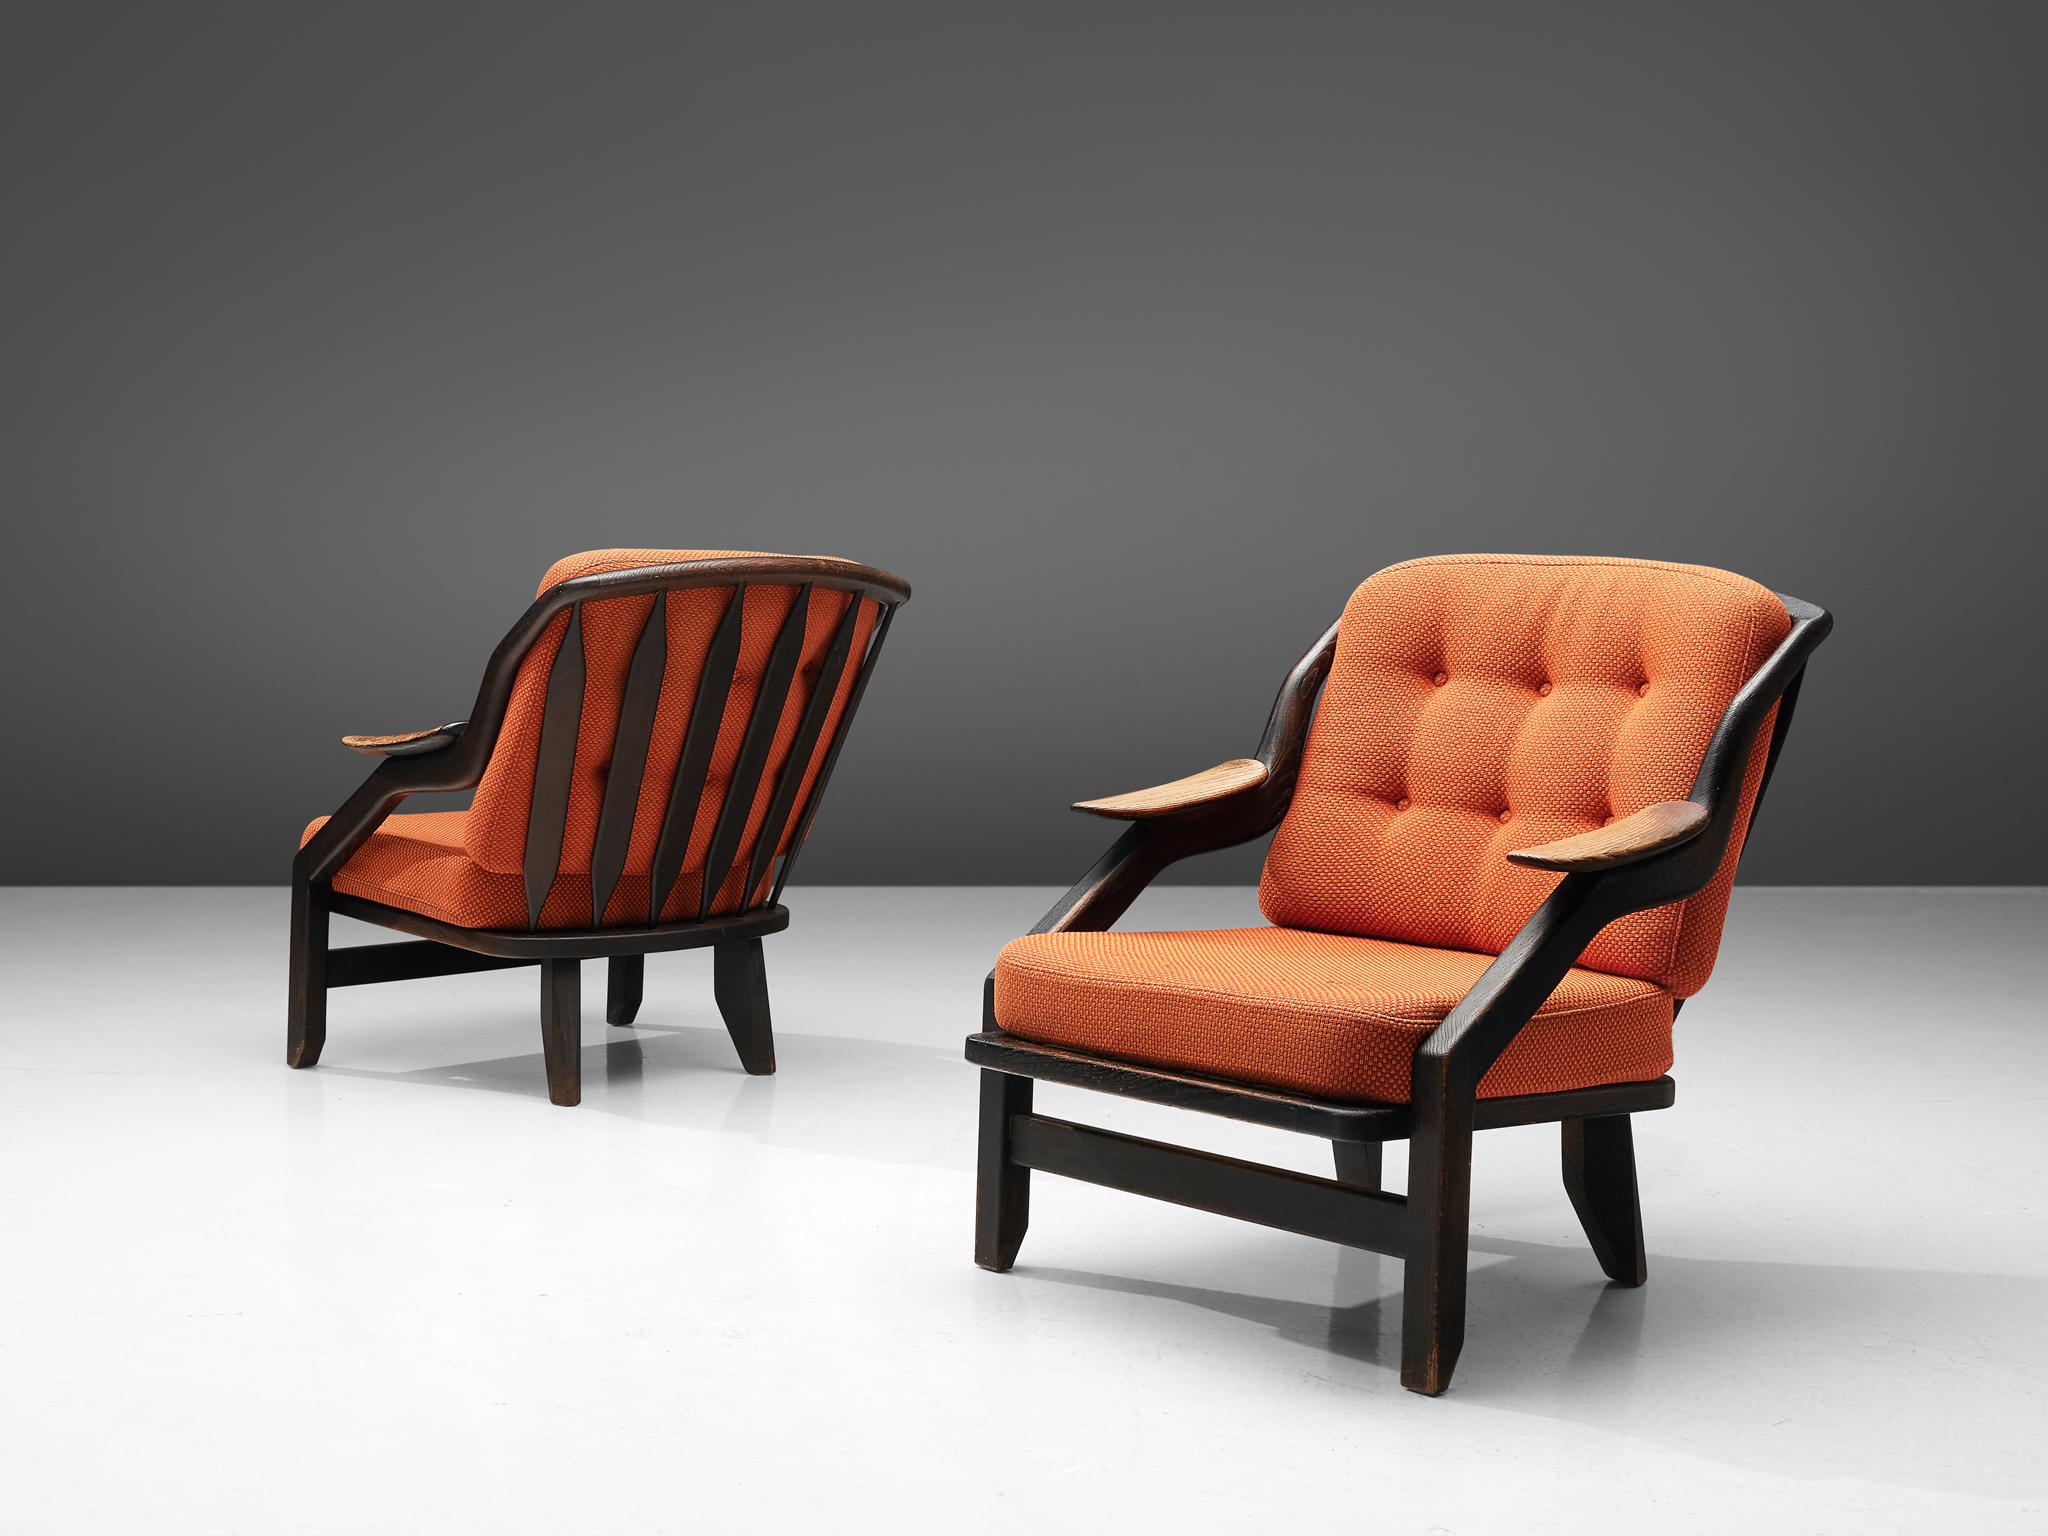 Guillerme & Chambron for Votre Maison, pair of 'Gregoire' lounge chairs, fabric, dark stained oak, France, 1950s.

A pair of lounge chairs by Guillerme et Chambron. This French designer duo is known for their extreme high-quality solid oak